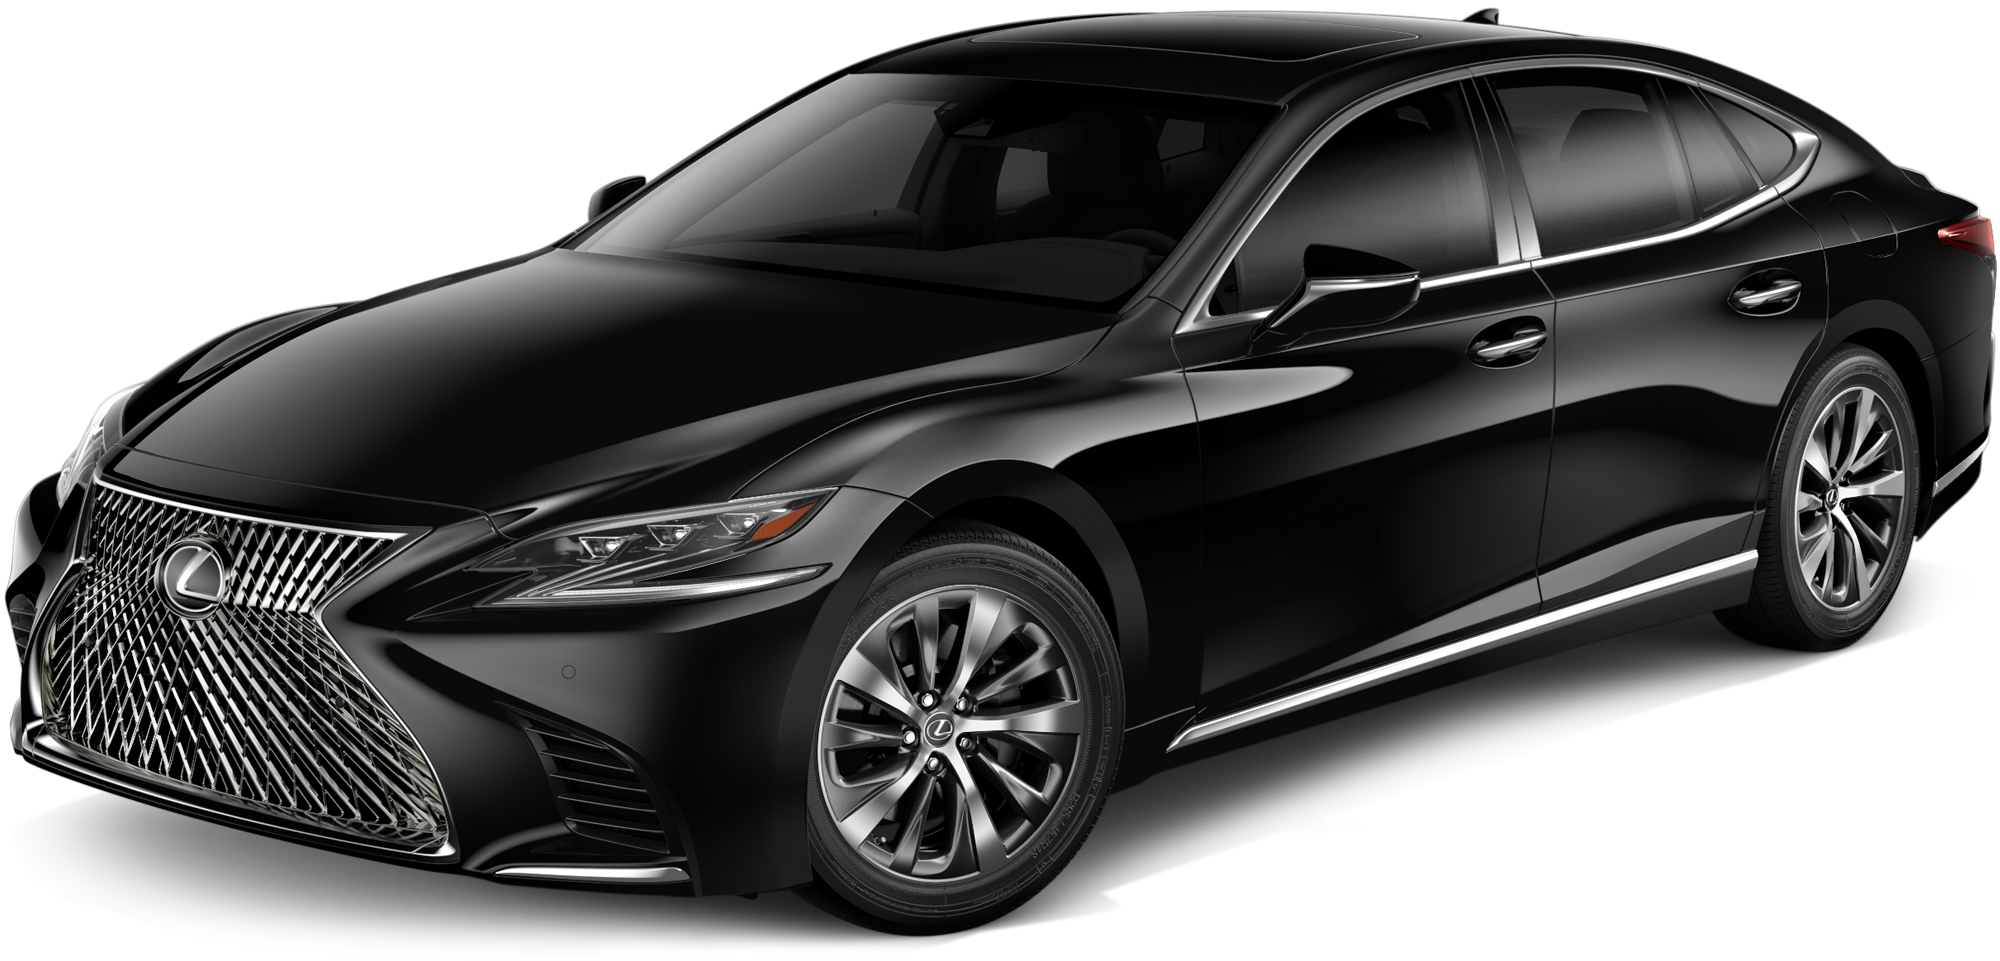 2020 Lexus LS 500 Incentives, Specials & Offers in Glenview IL